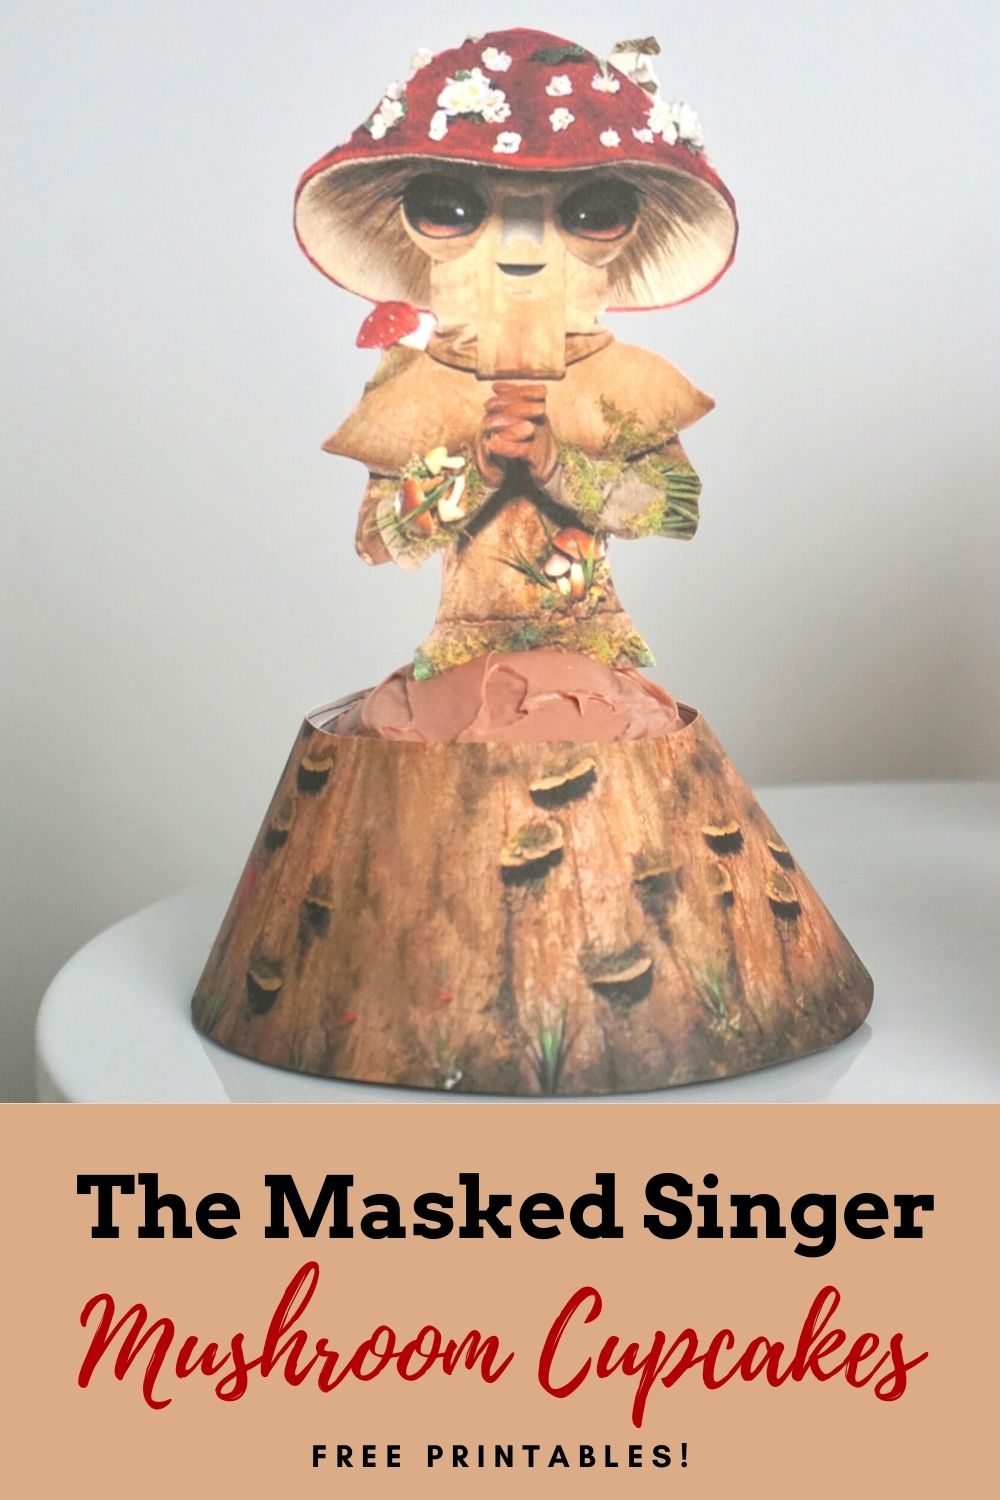 The Masked Singer Mushroom Cupcakes and free printables